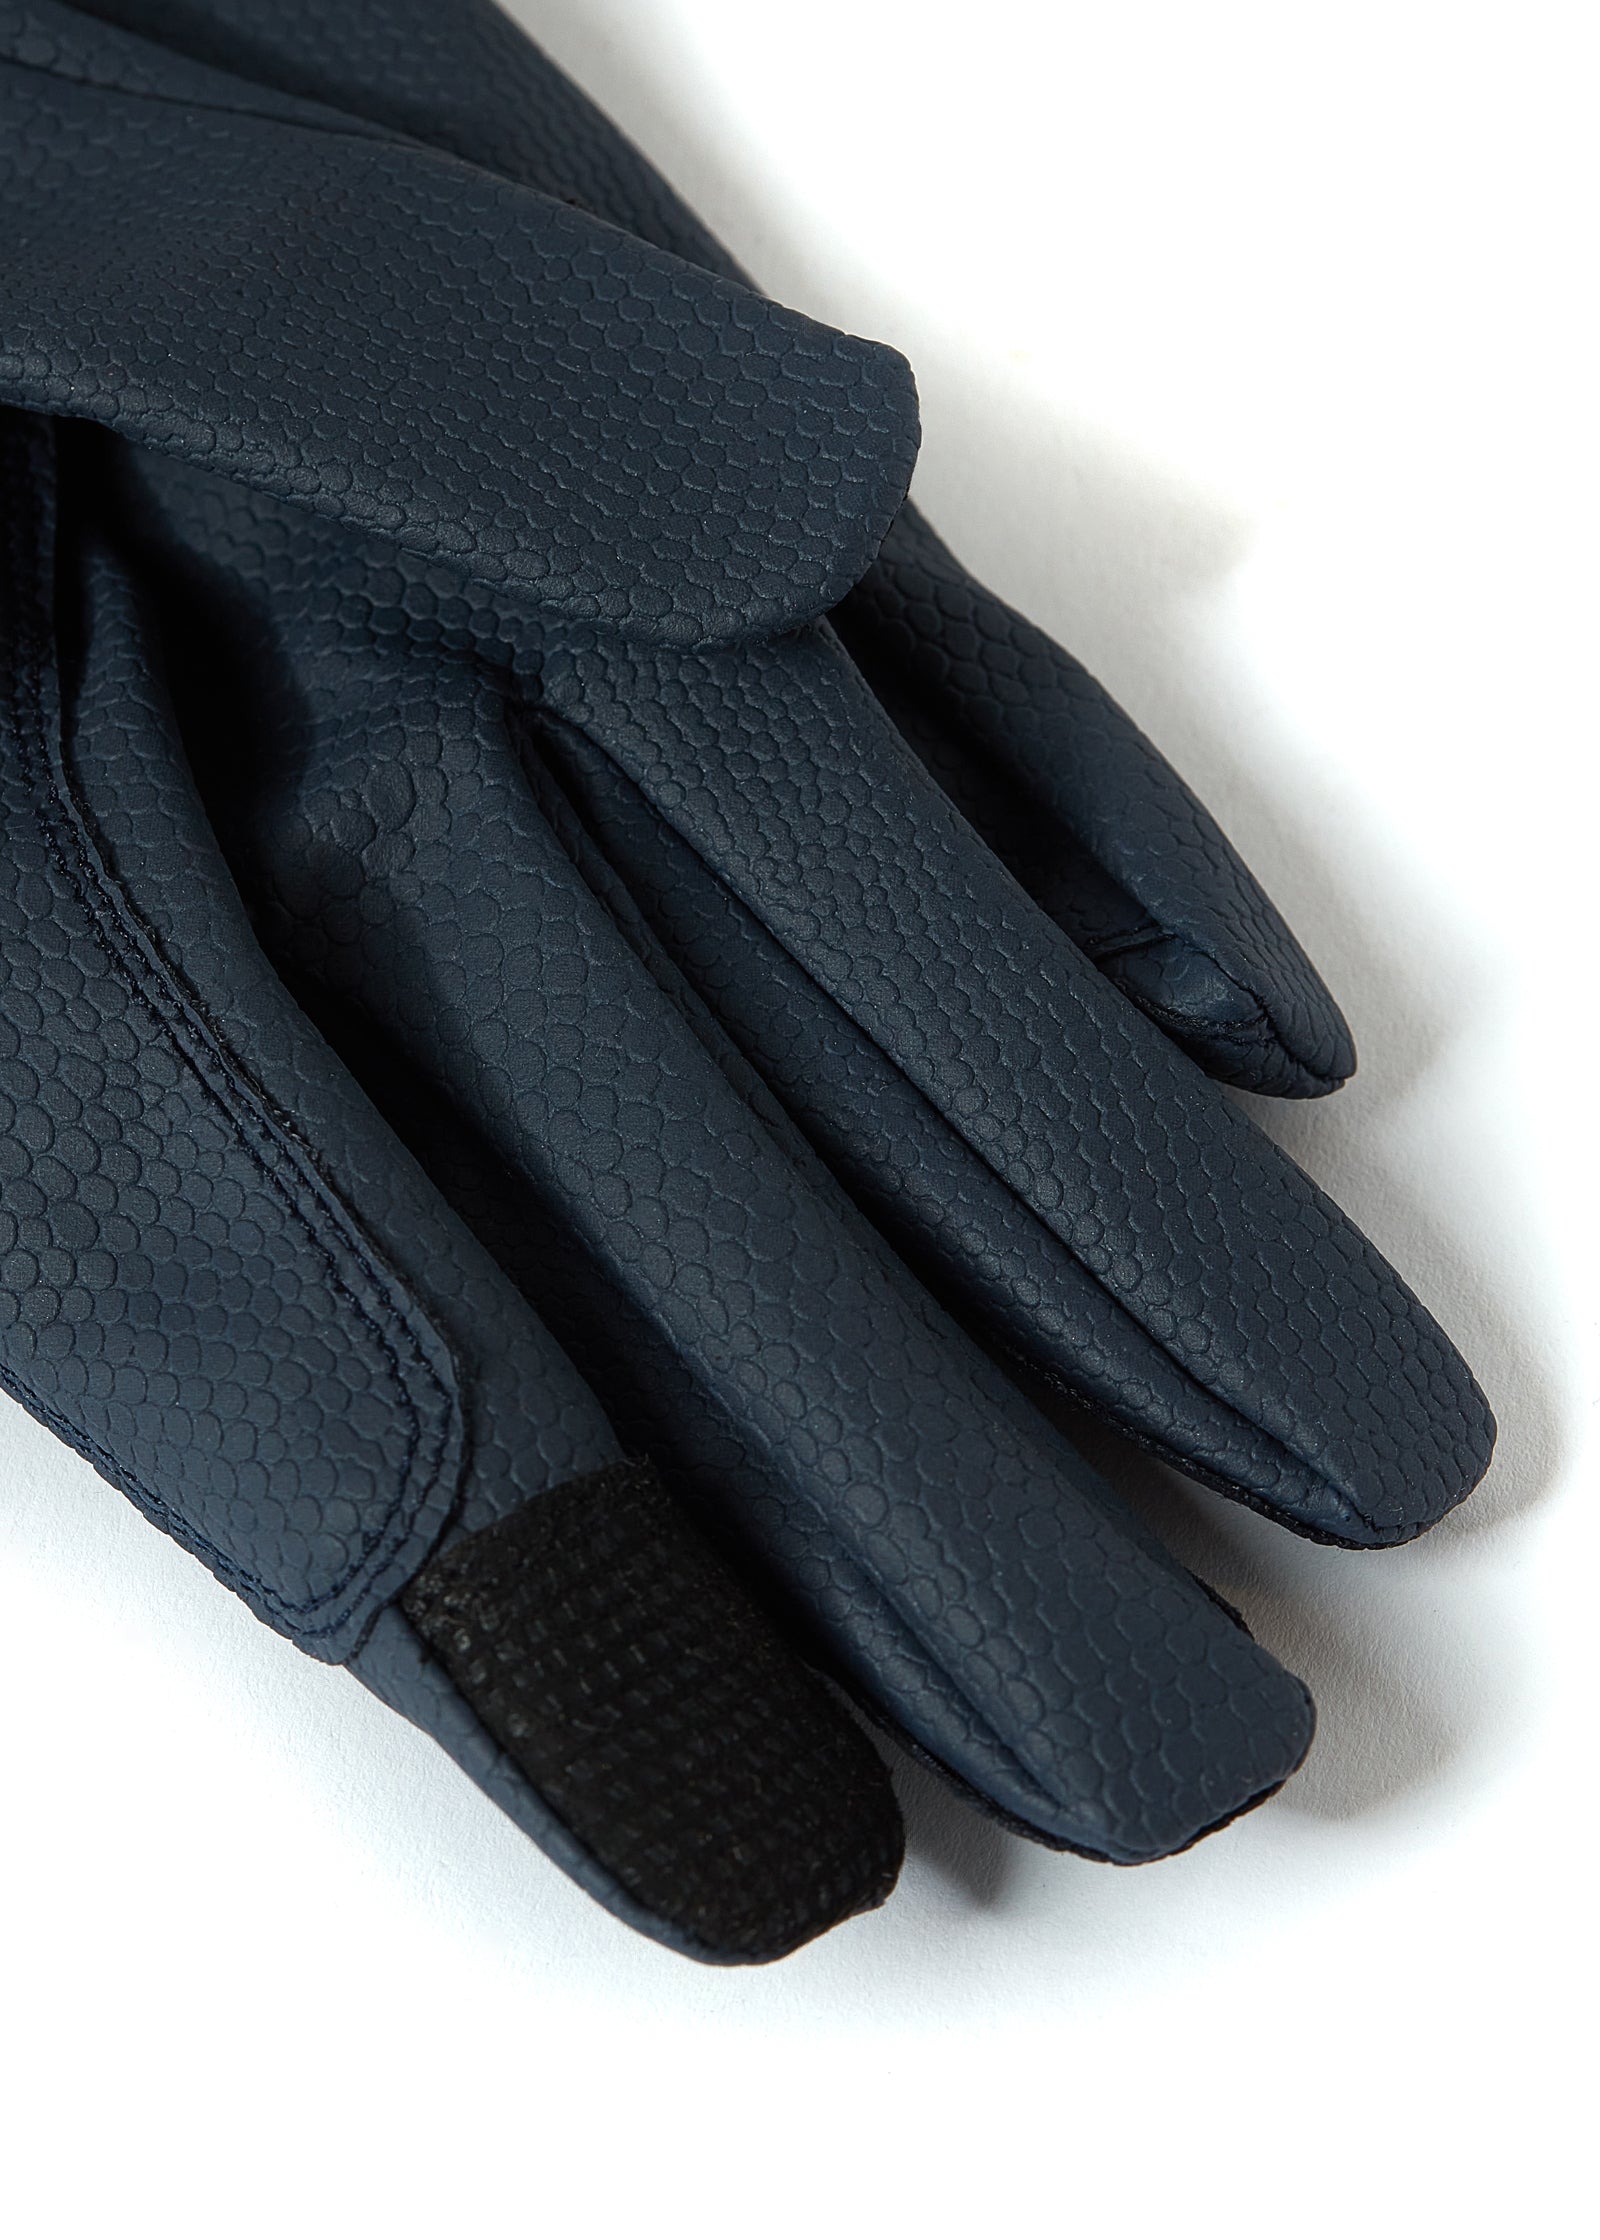 Holland Cooper Burghley Riding Gloves